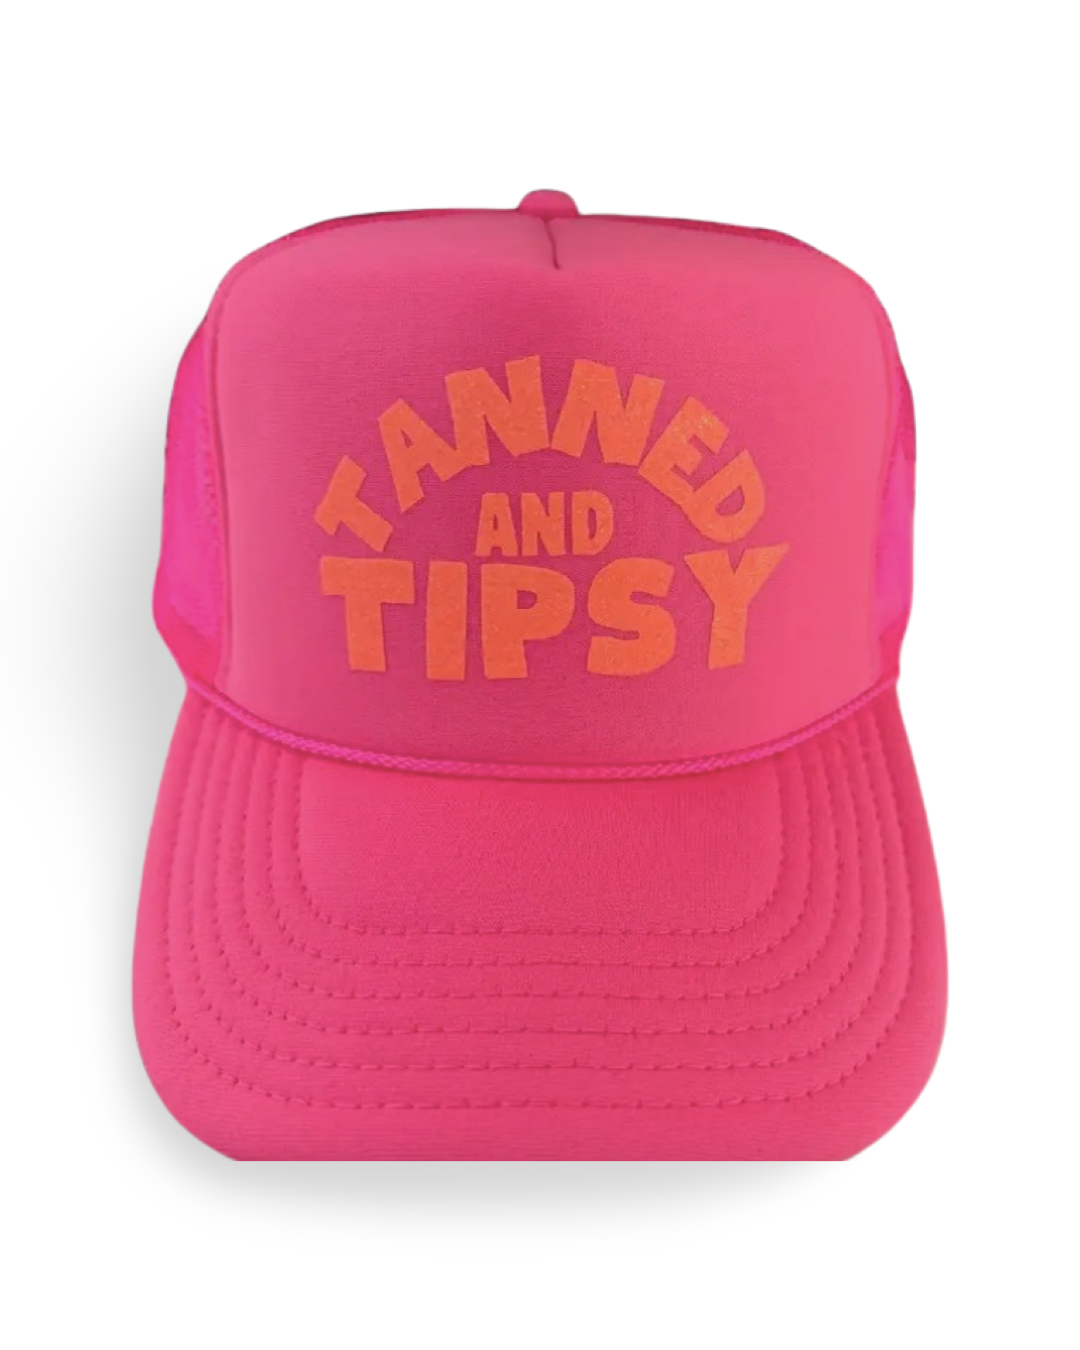 Tanned and Tipsy Hat in Neon Pink